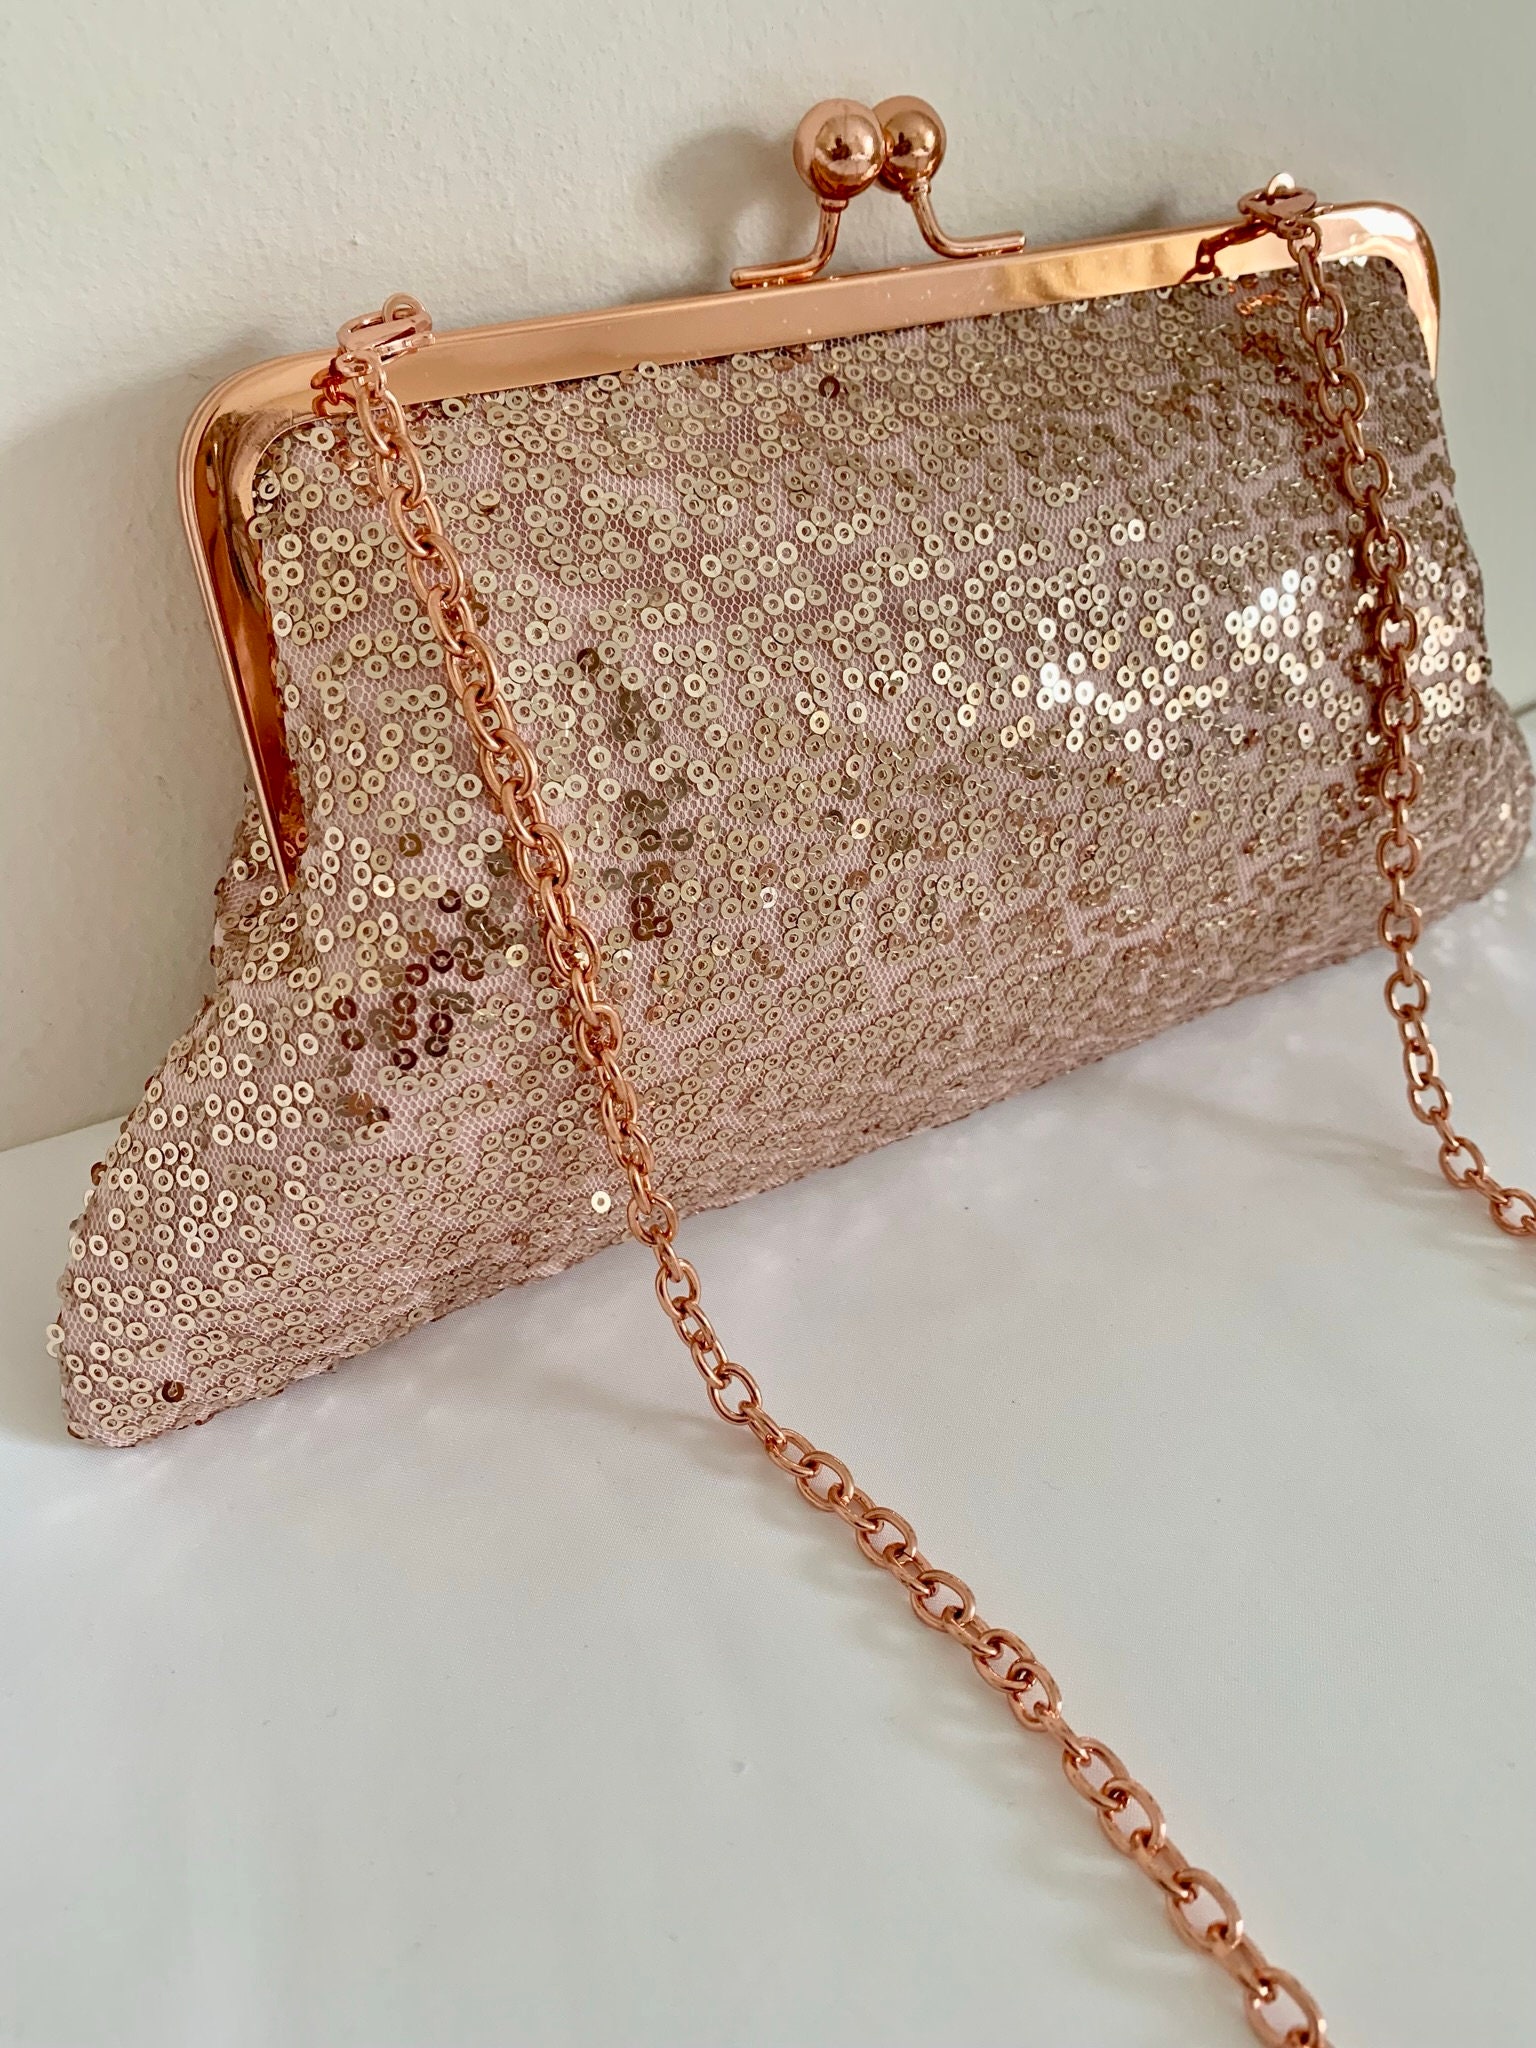 Dome Cosmetic Case | Rose Gold Metallic Leather